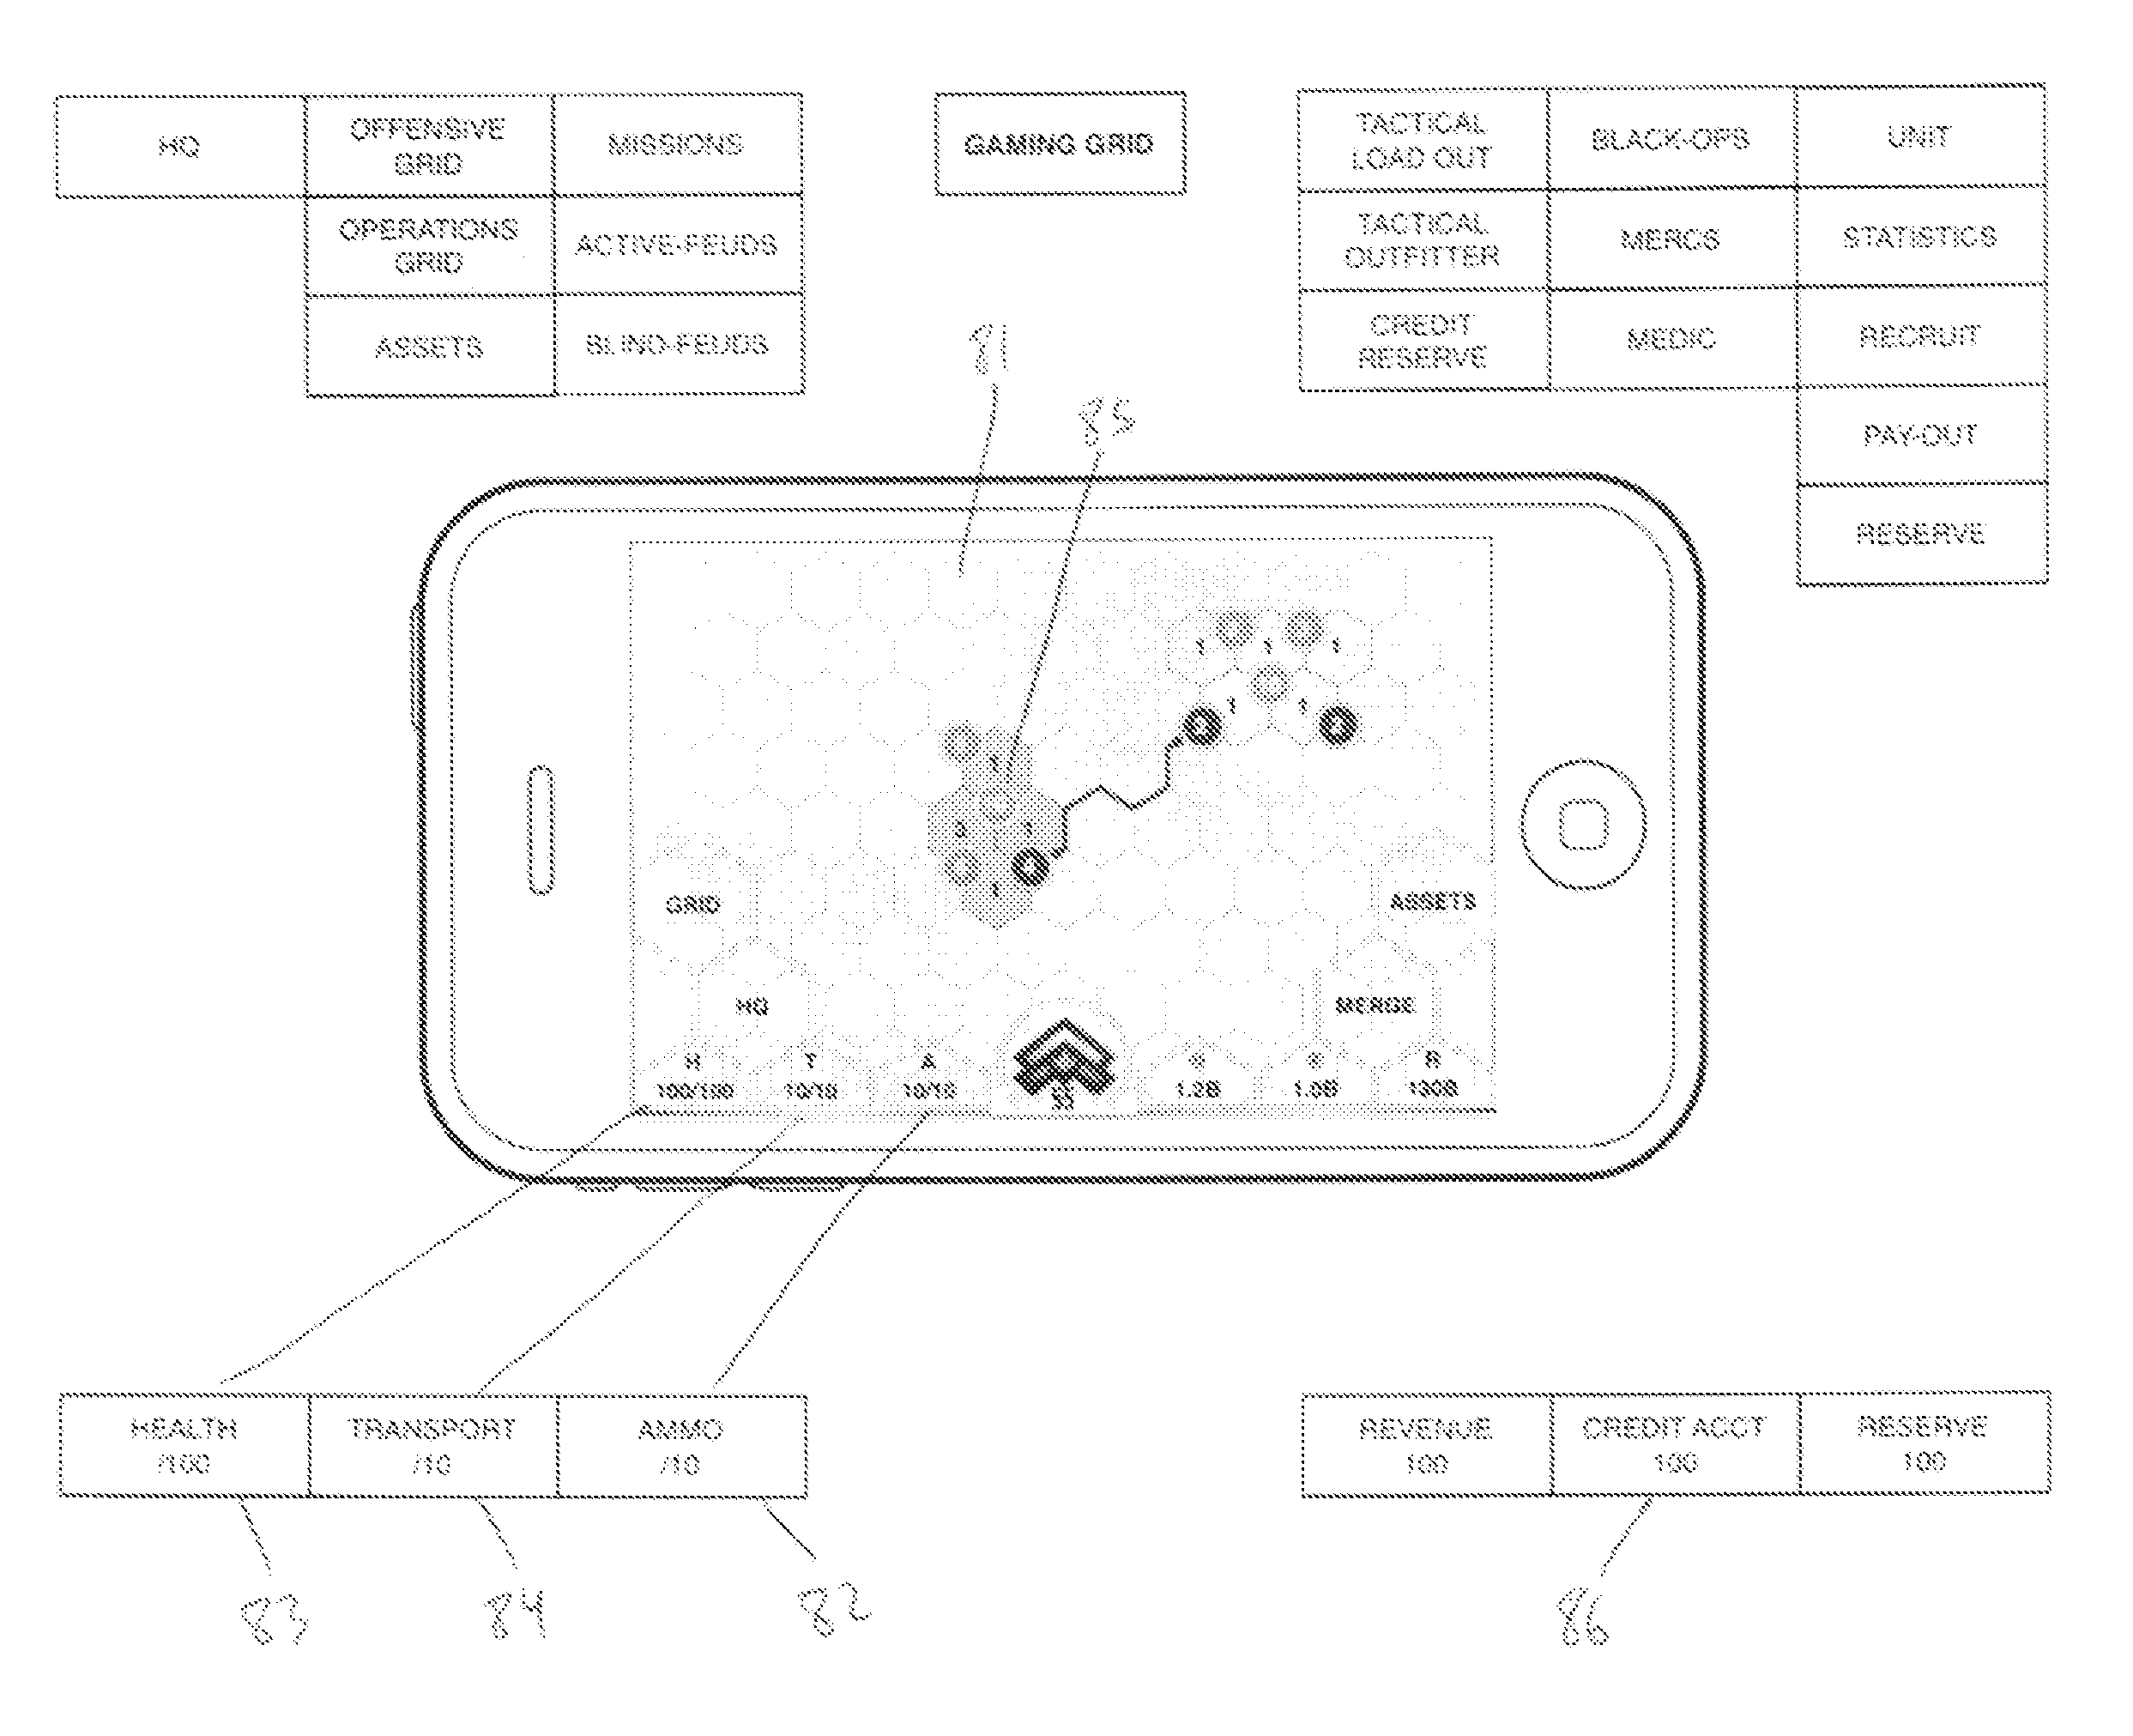 System and Methods for Role-Playing Gaming